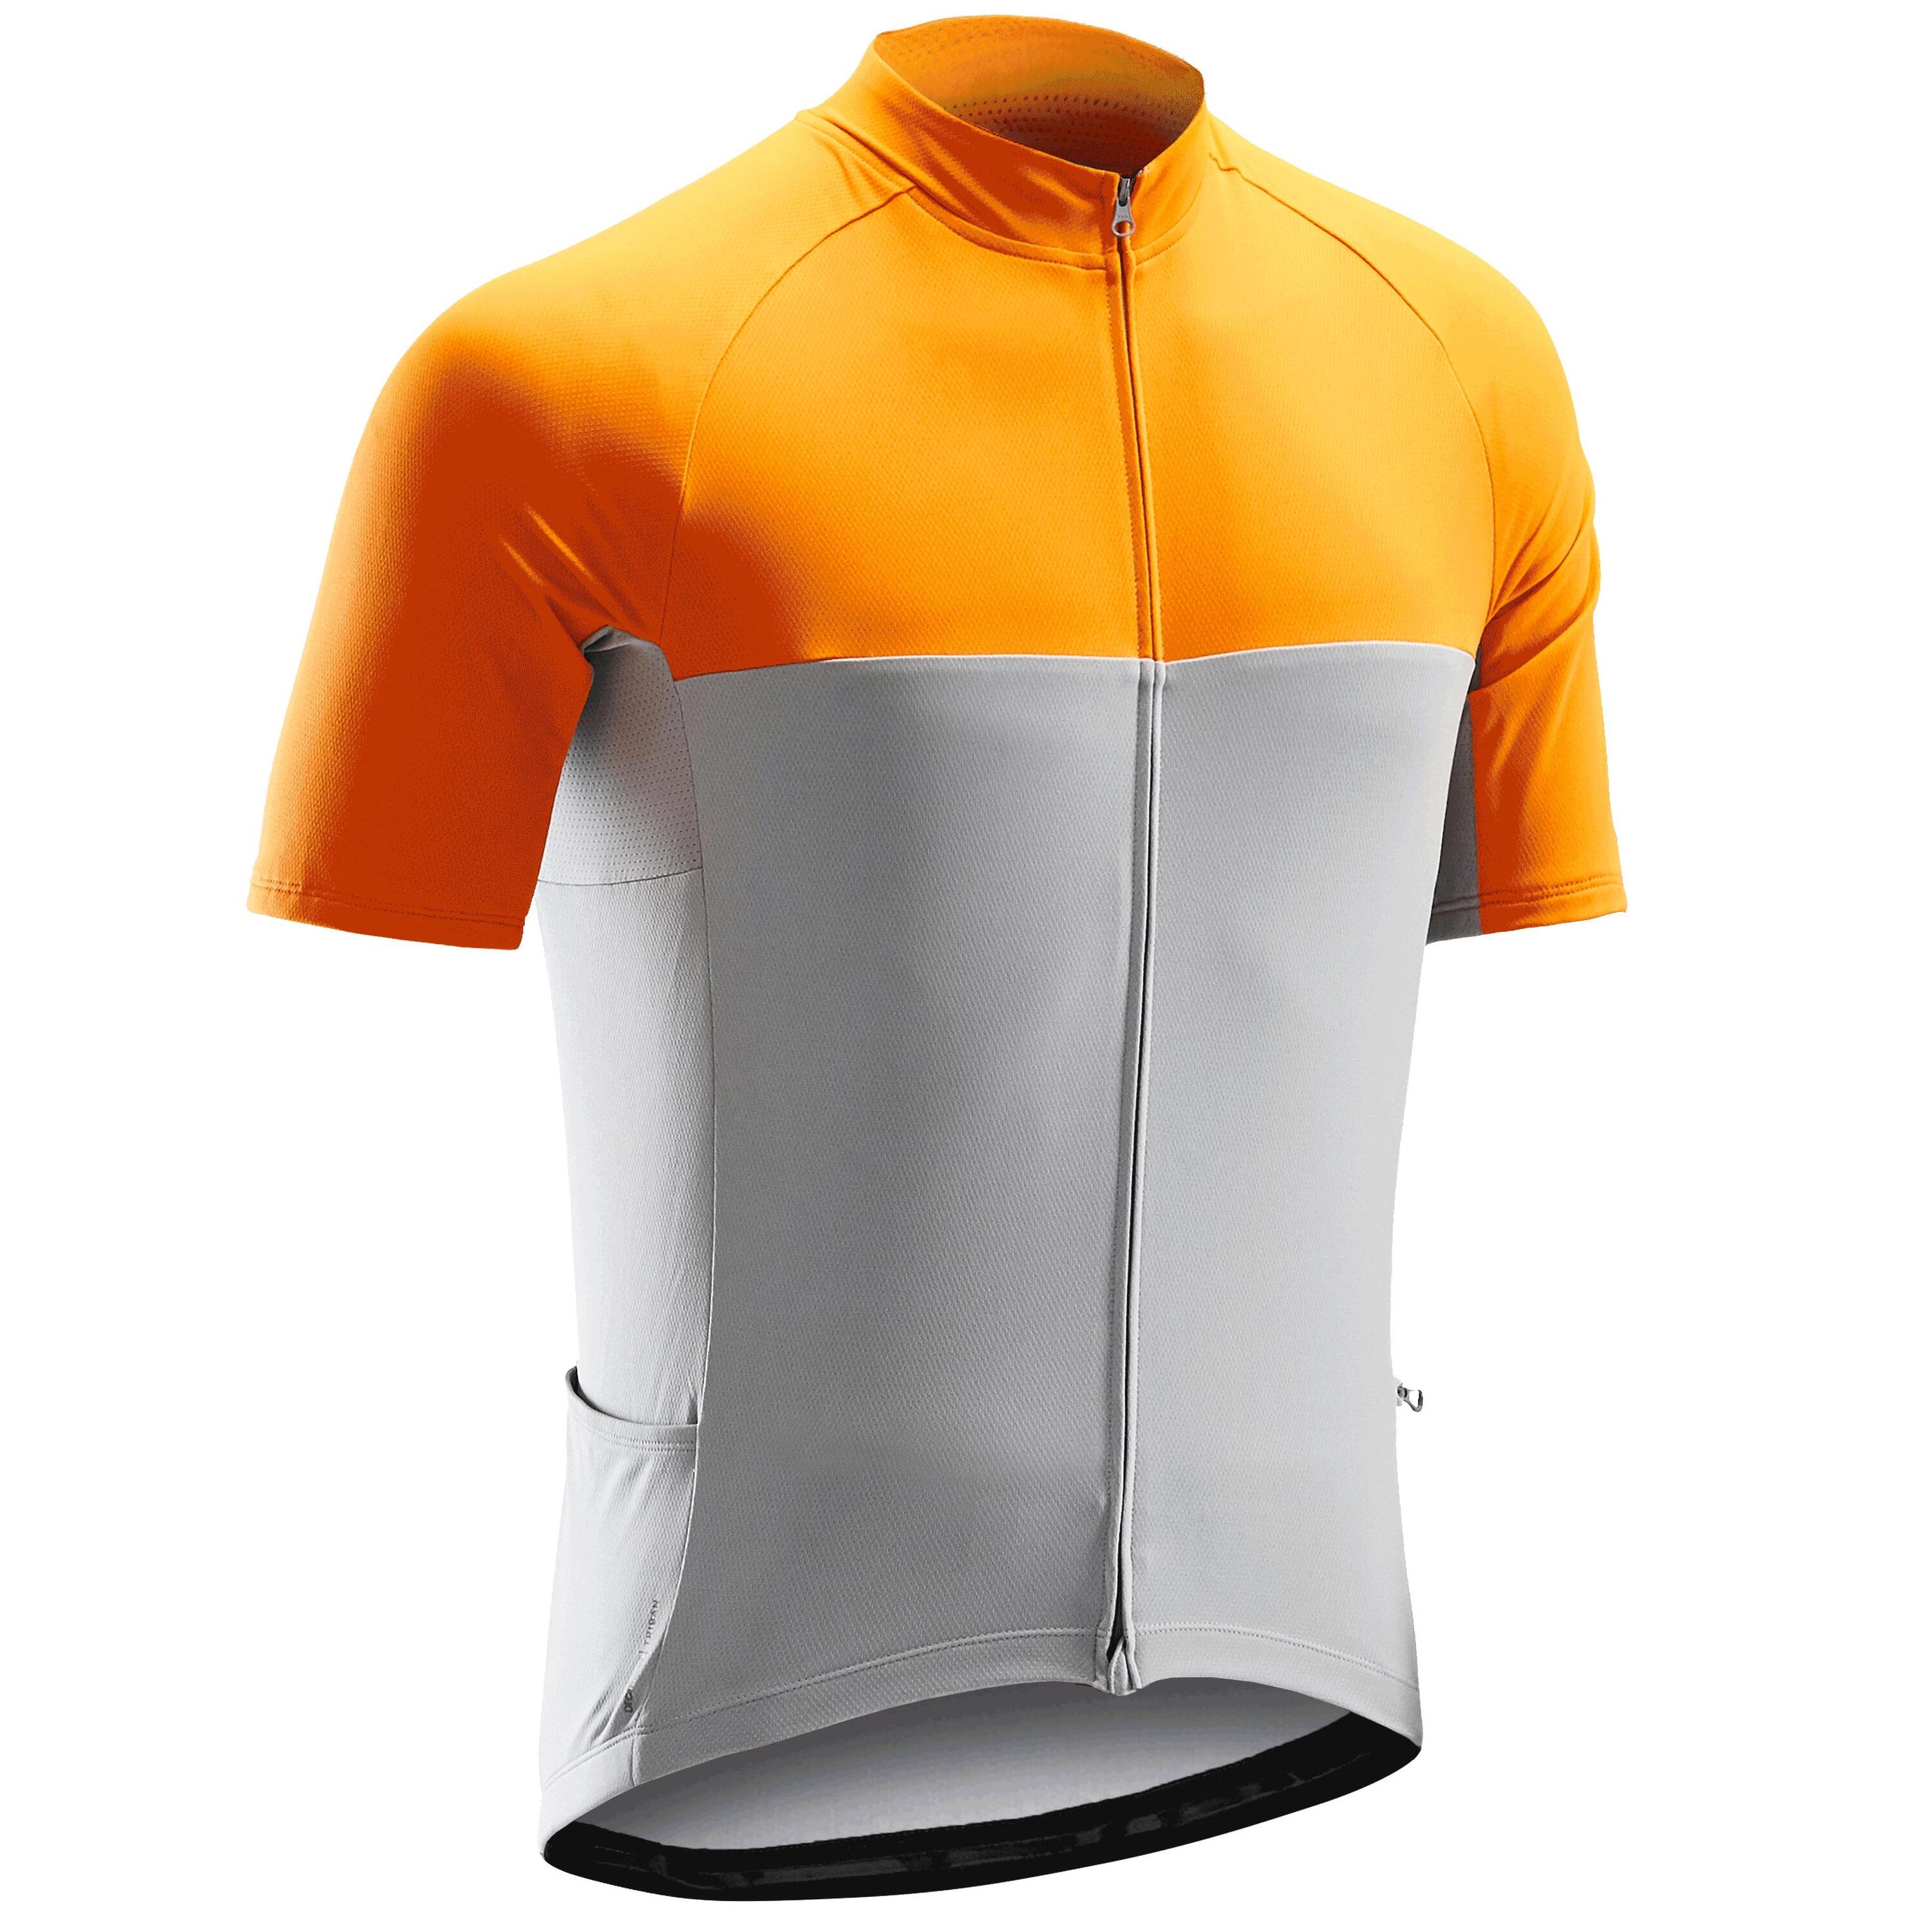 RC100 Short-Sleeved Warm Weather Road Cycling and Touring Jersey - Grey/Orange 1/11